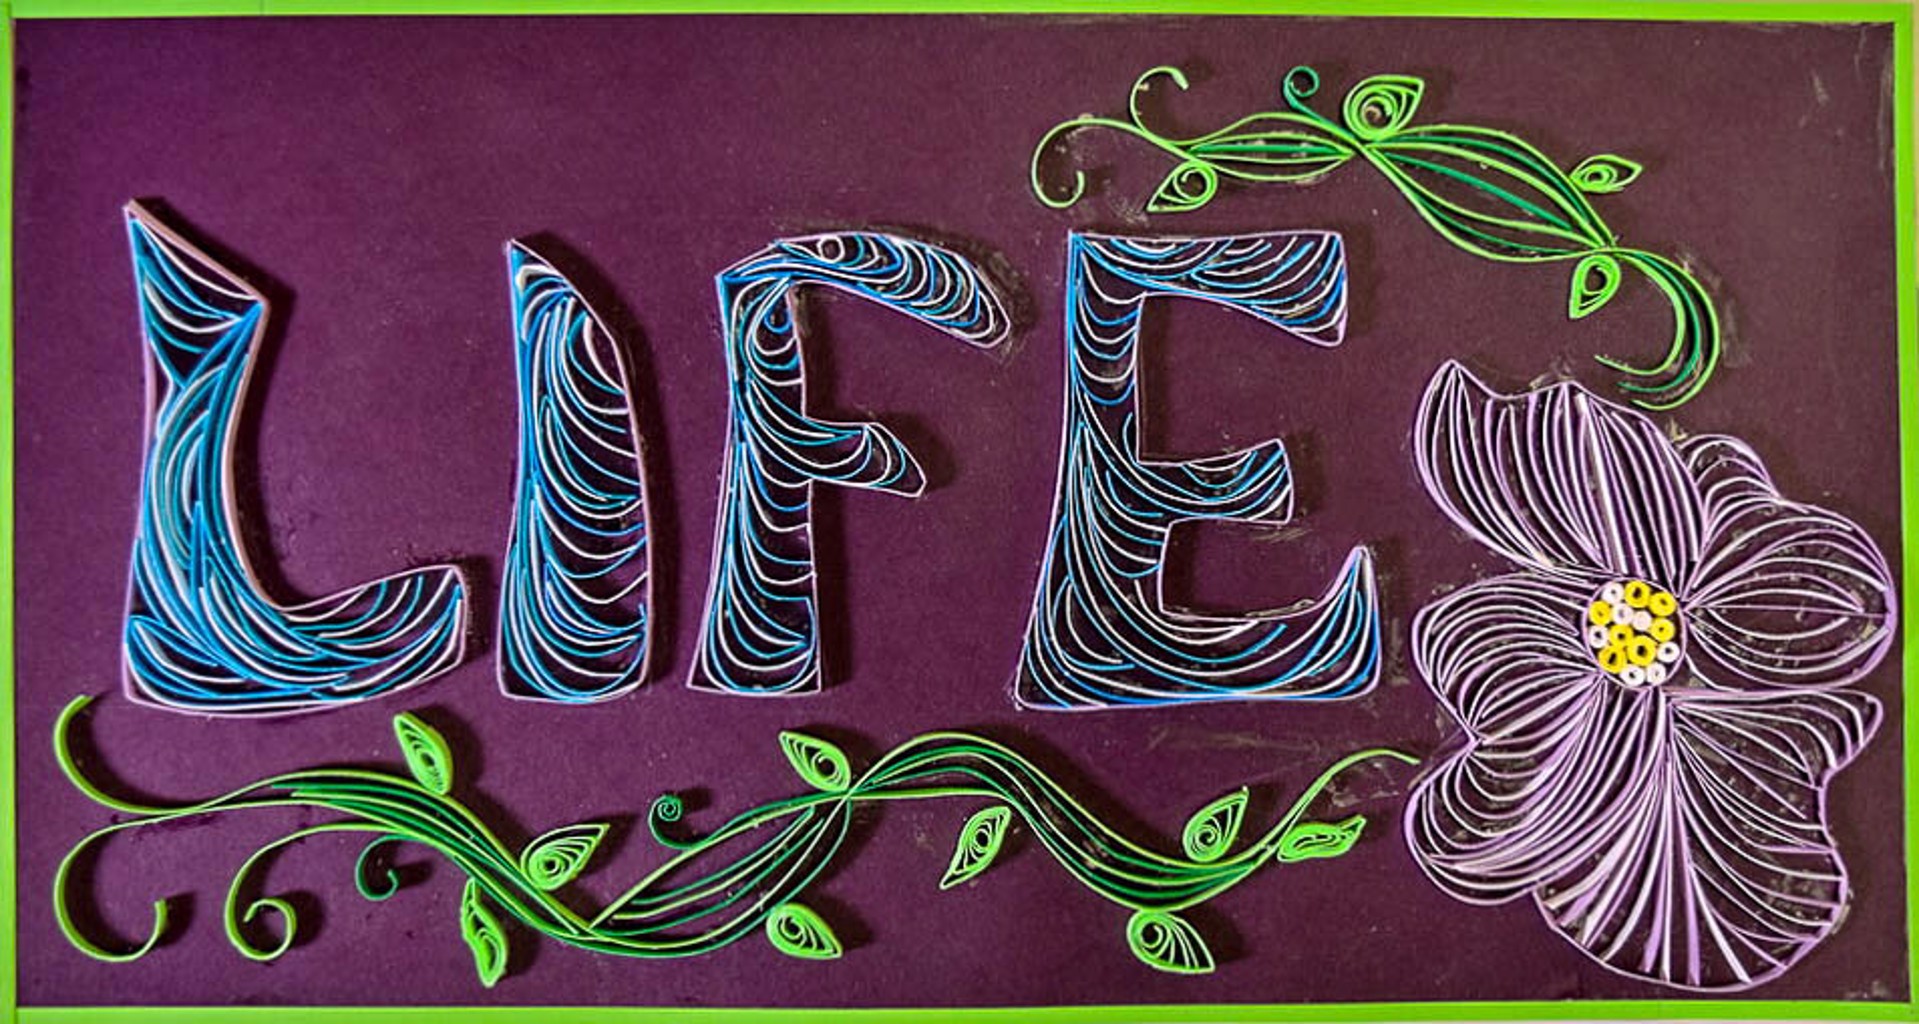 Life by Angela Smith